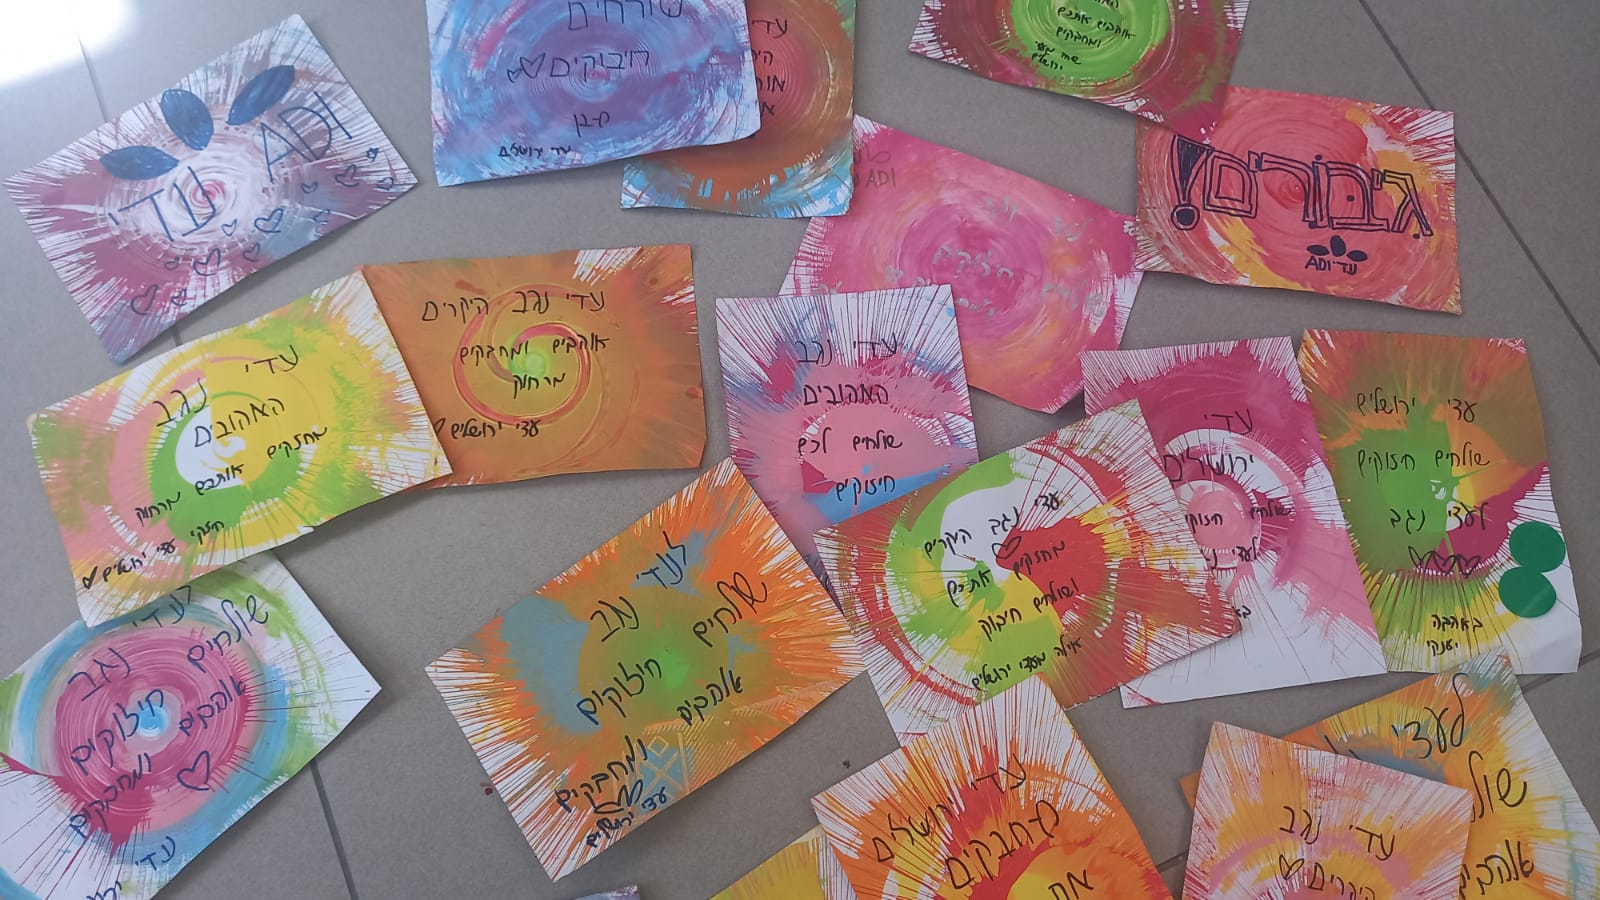 Painted thank you cards for soldiers כרטיסי ברכה צבועיים עם תודה לחיילים